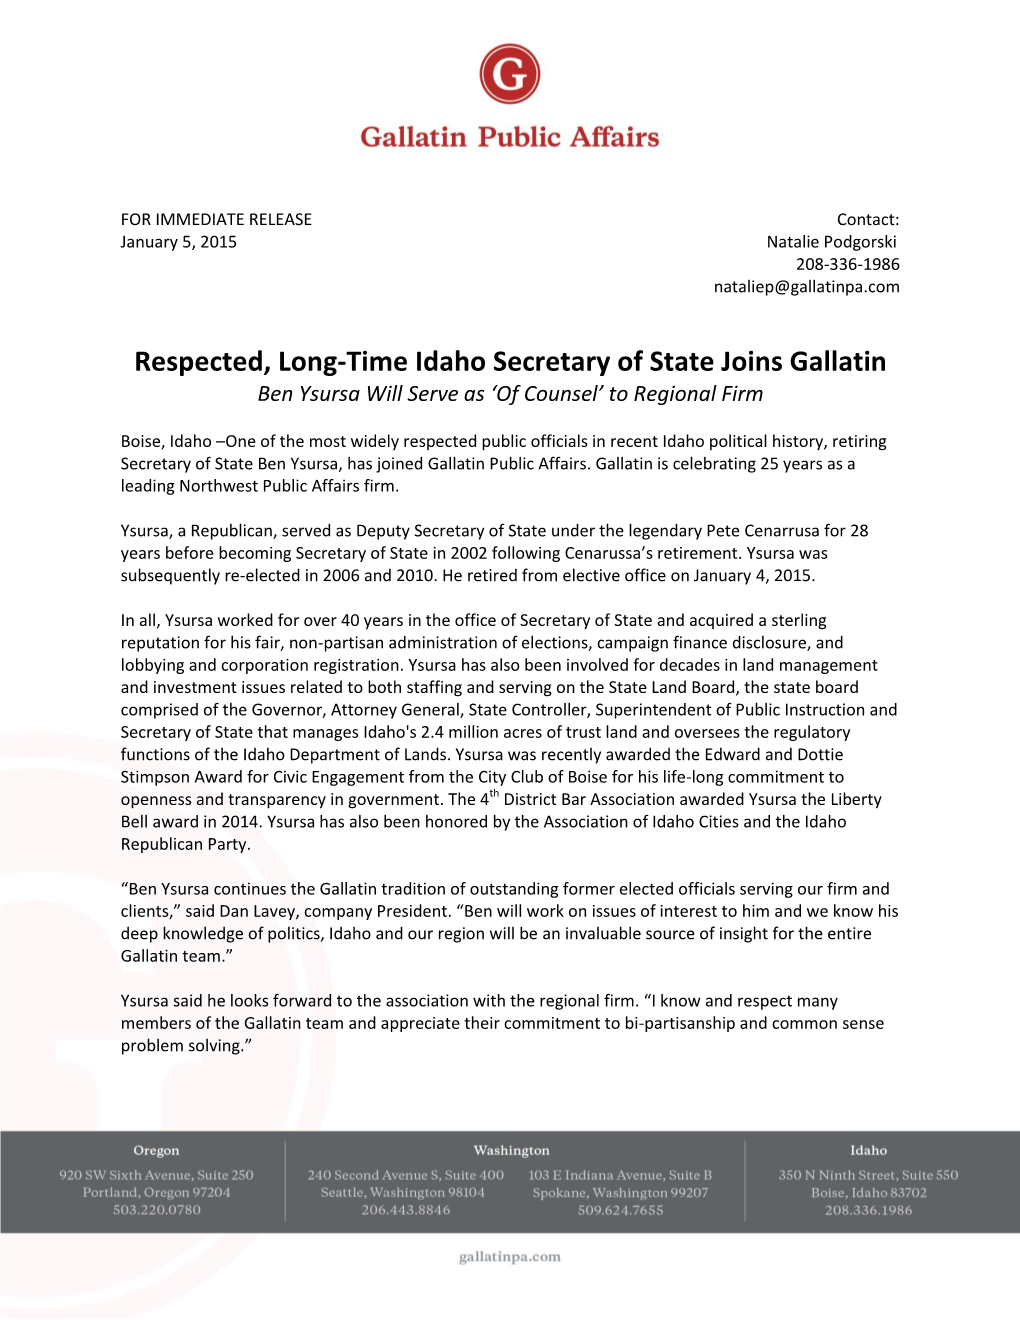 Respected, Long-Time Idaho Secretary of State Joins Gallatin Ben Ysursa Will Serve As ‘Of Counsel’ to Regional Firm